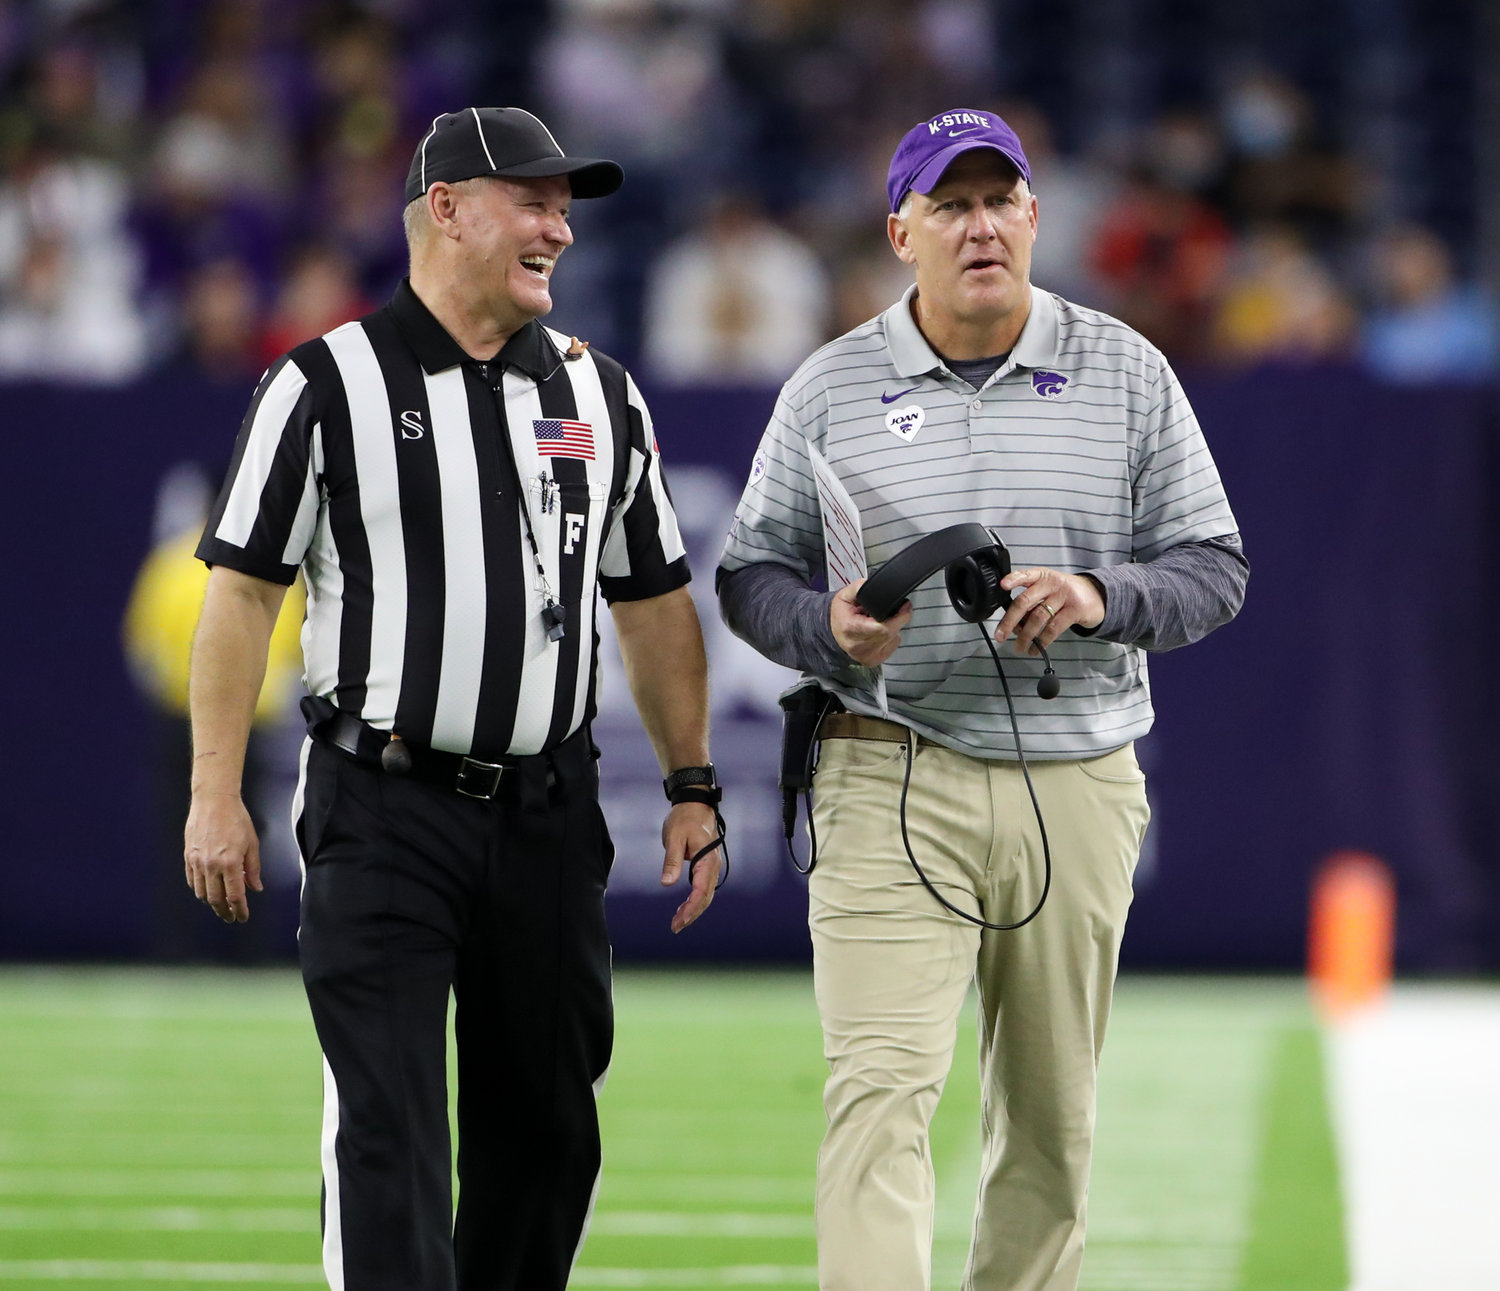 Field judge Timothy Maguire has a laugh with Kansas State Wildcats head coach Chris Klieman during the TaxAct Texas Bowl on Jan. 4, 2022 in Houston, Texas.